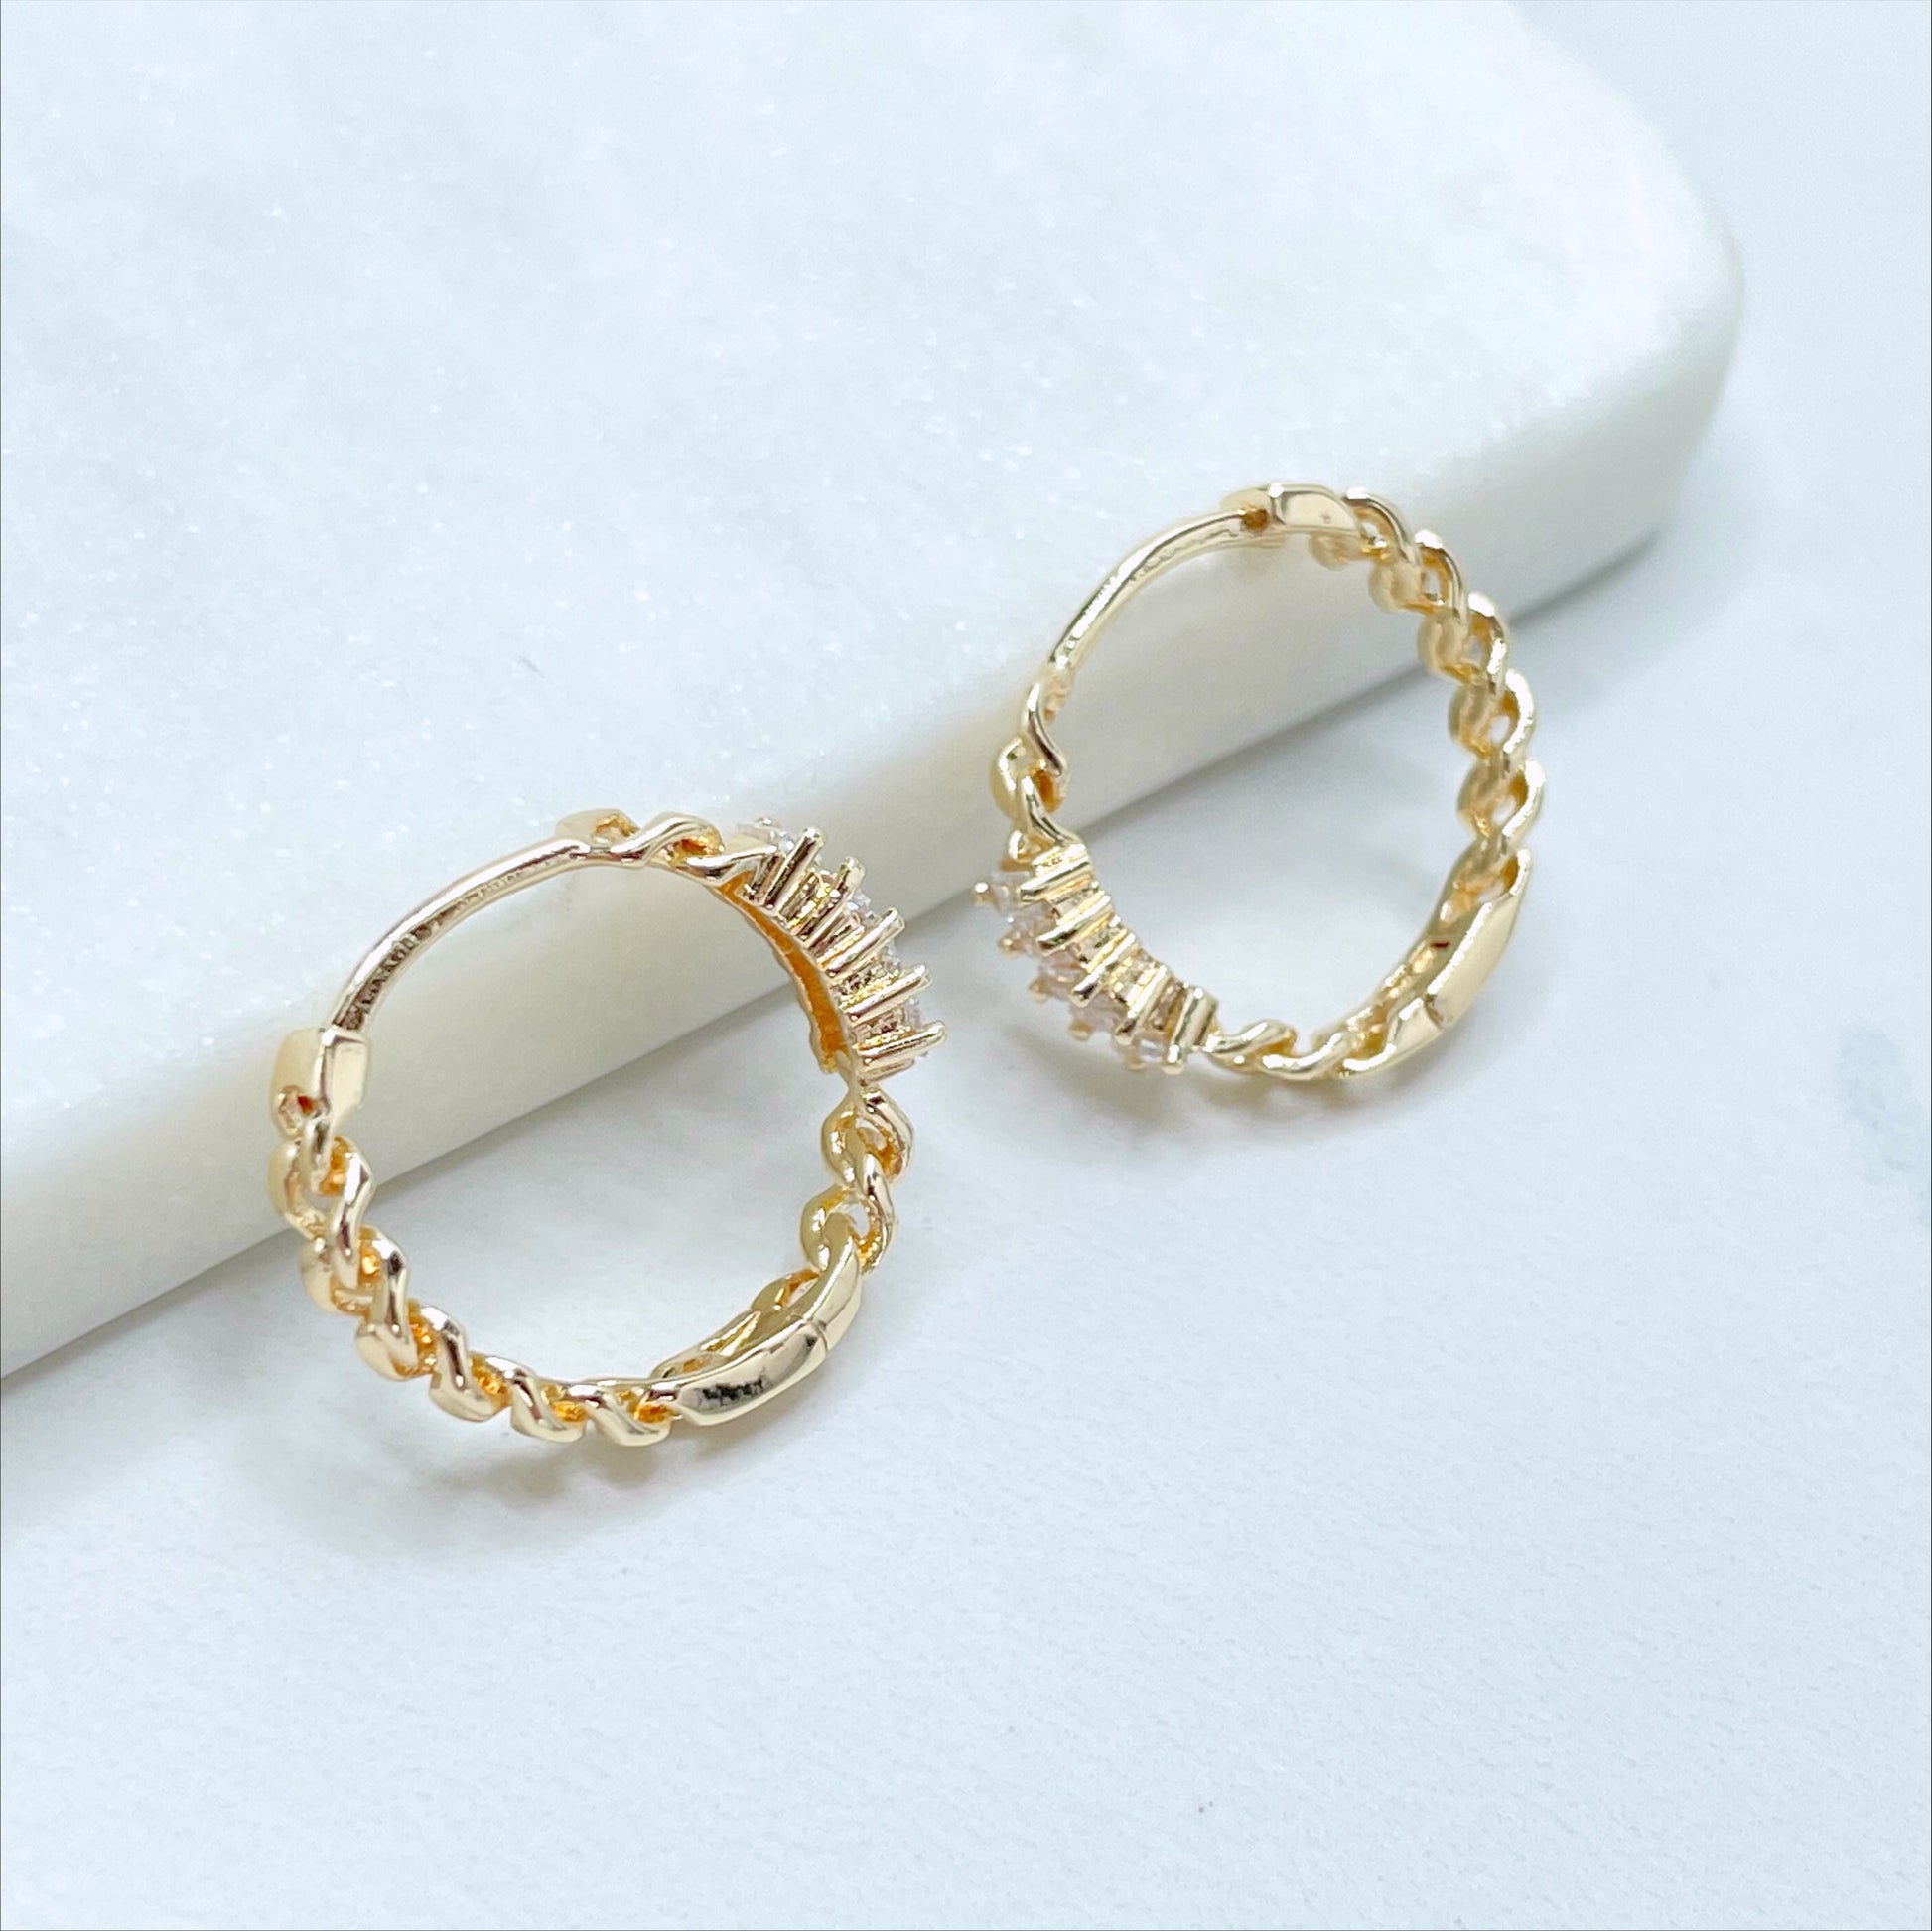 18k Gold Filled 4mm Thickness, with Cubic Zirconia 3mm Curb Link, 20mm, Hoop Earrings Wholesale Jewelry Making Supplies